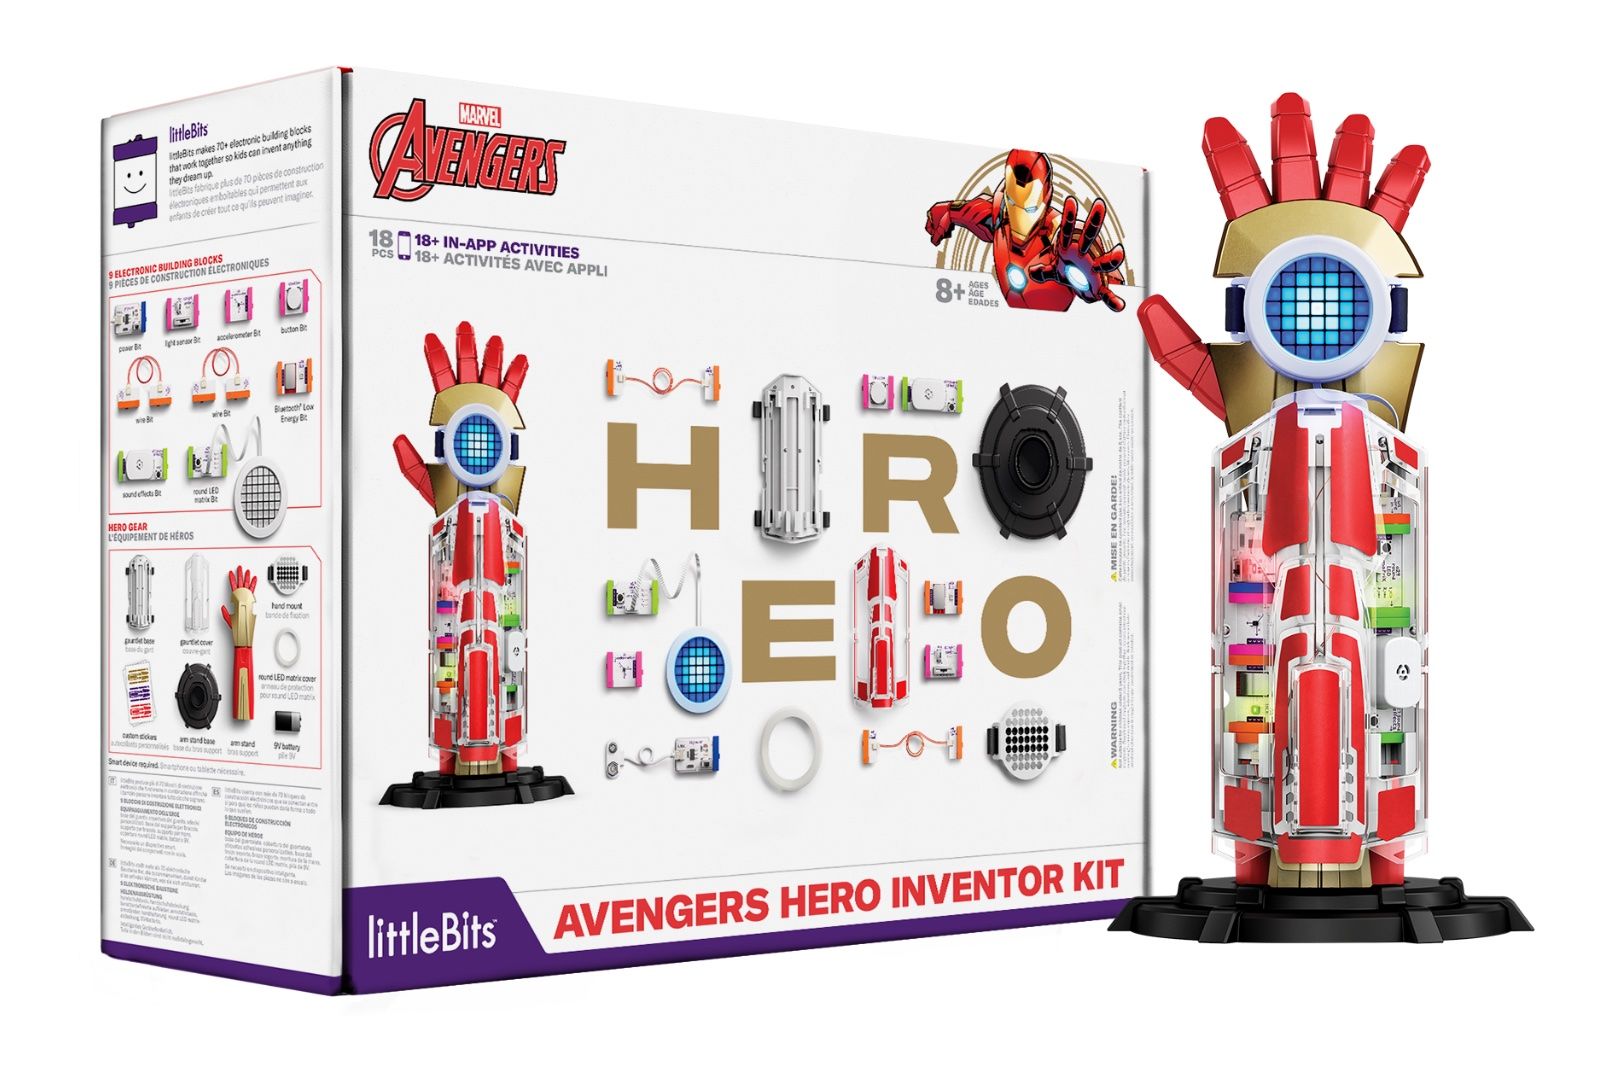 Remember the LittleBits R2-D2 This Avengers Hero Inventor Kit means you can go full Tony Stark image 1